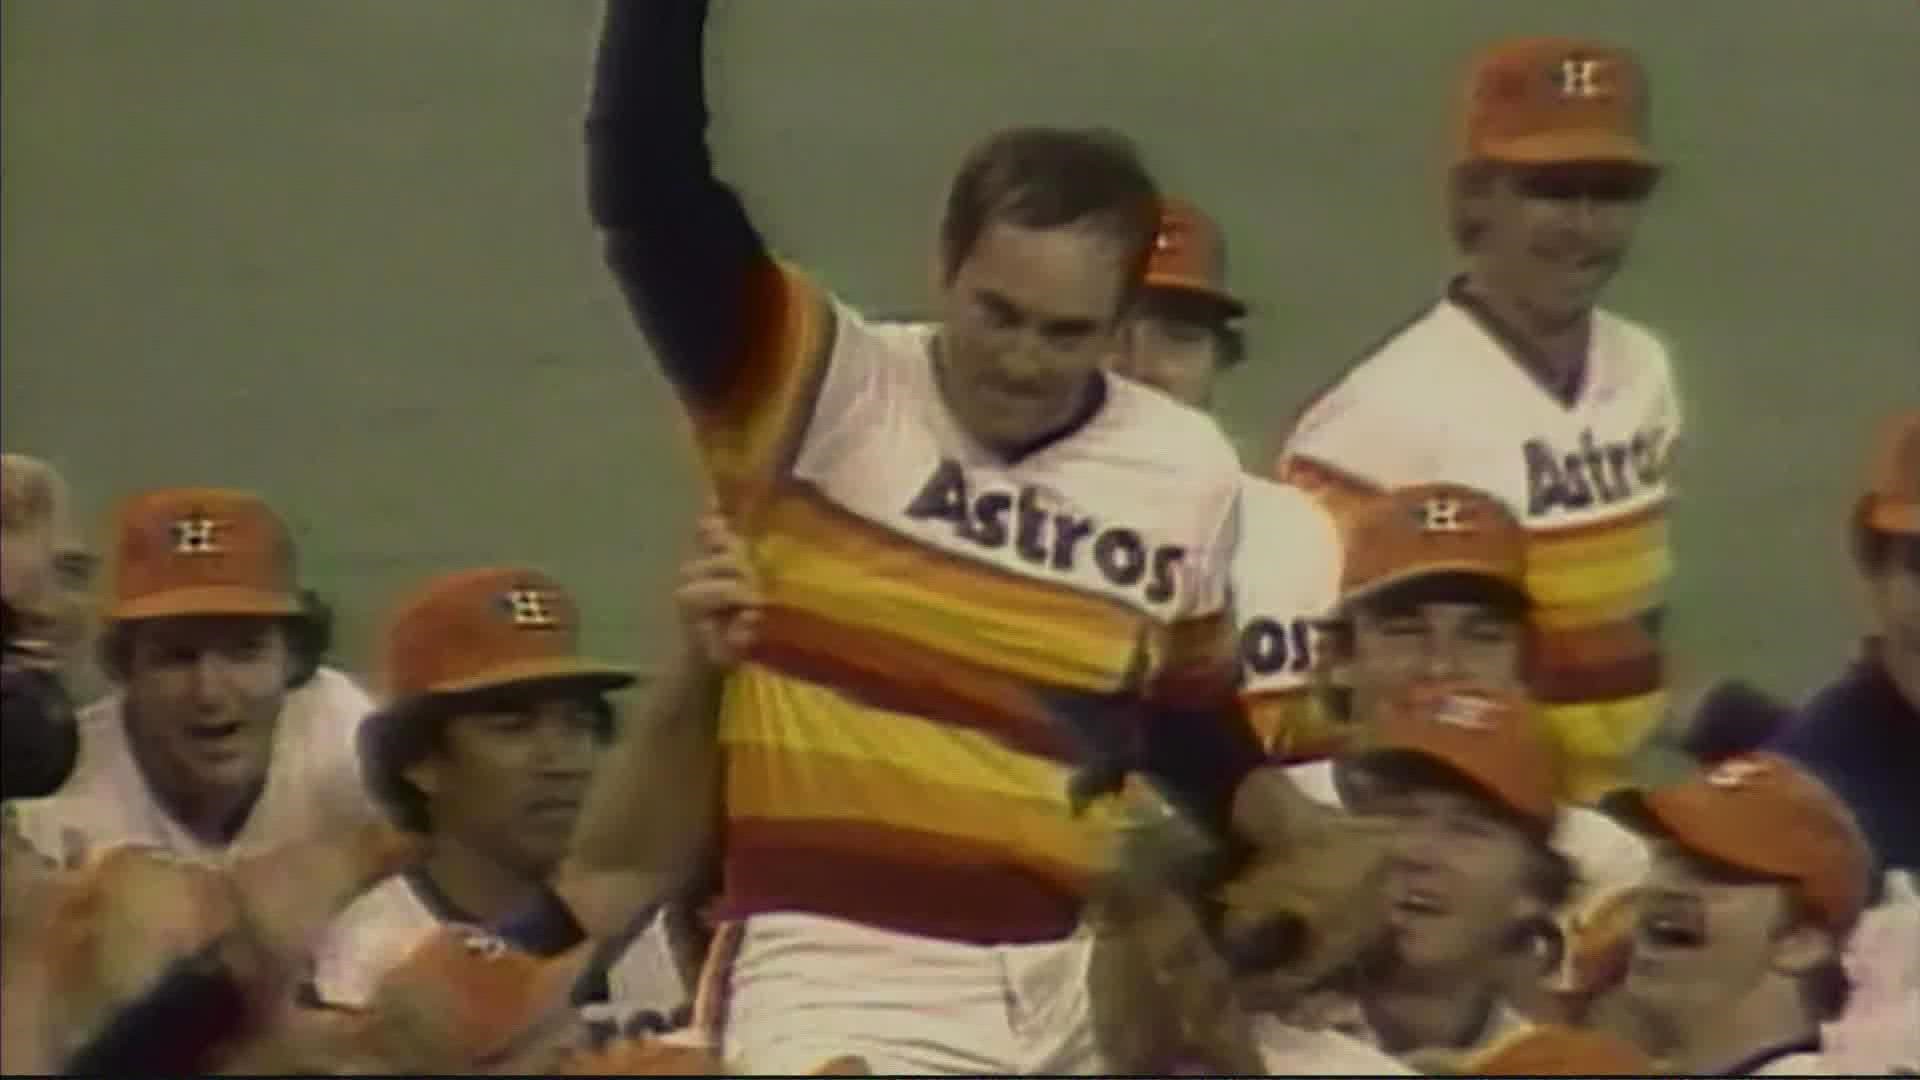 Film about life and career of Astros icon Nolan Ryan to premiere at South  by Southwest festival - ABC13 Houston